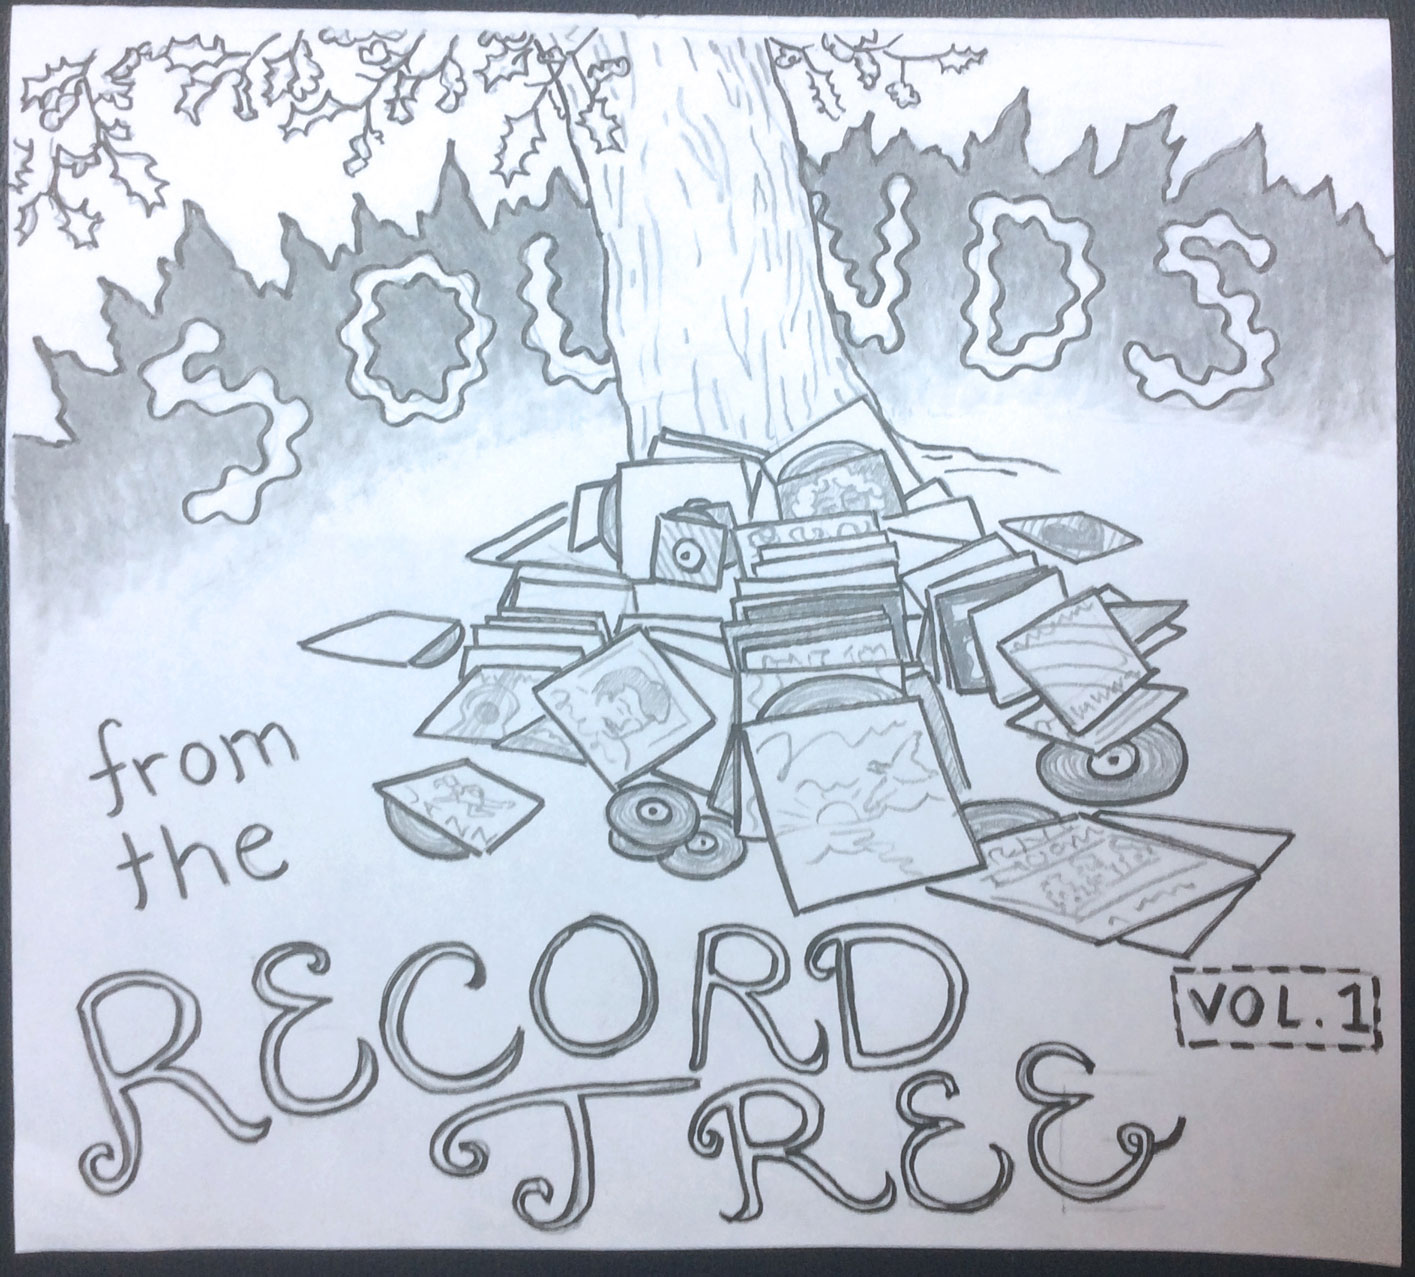 Cover for the Sounds of the Record Tree Volume 1 mixtape drawn by Martha Daghlian